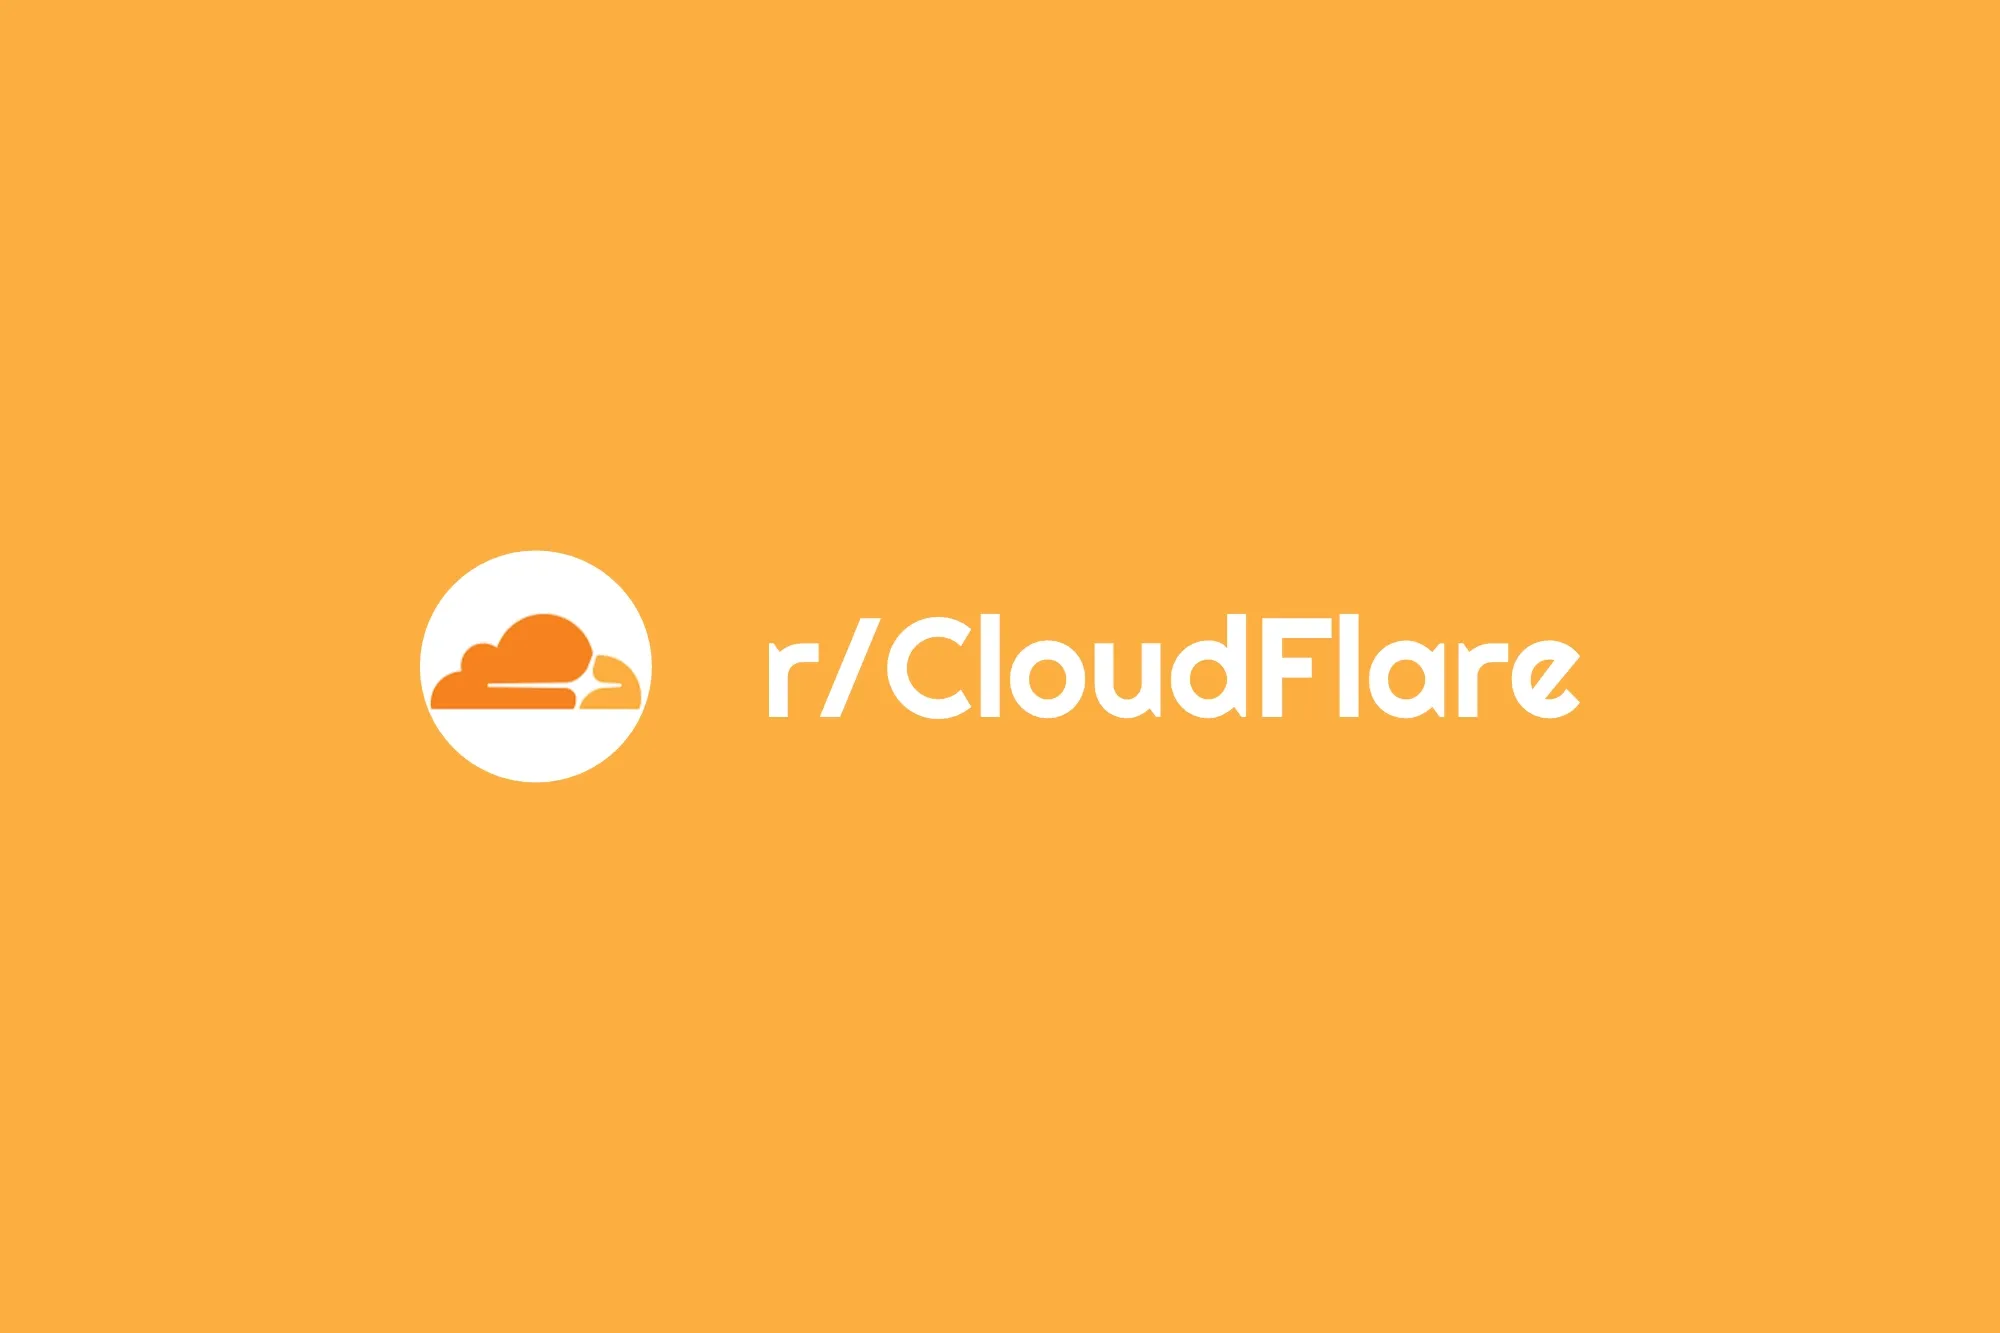 r/CloudFlare: Why do I have Adguard SSL for my website (cloudflare)?